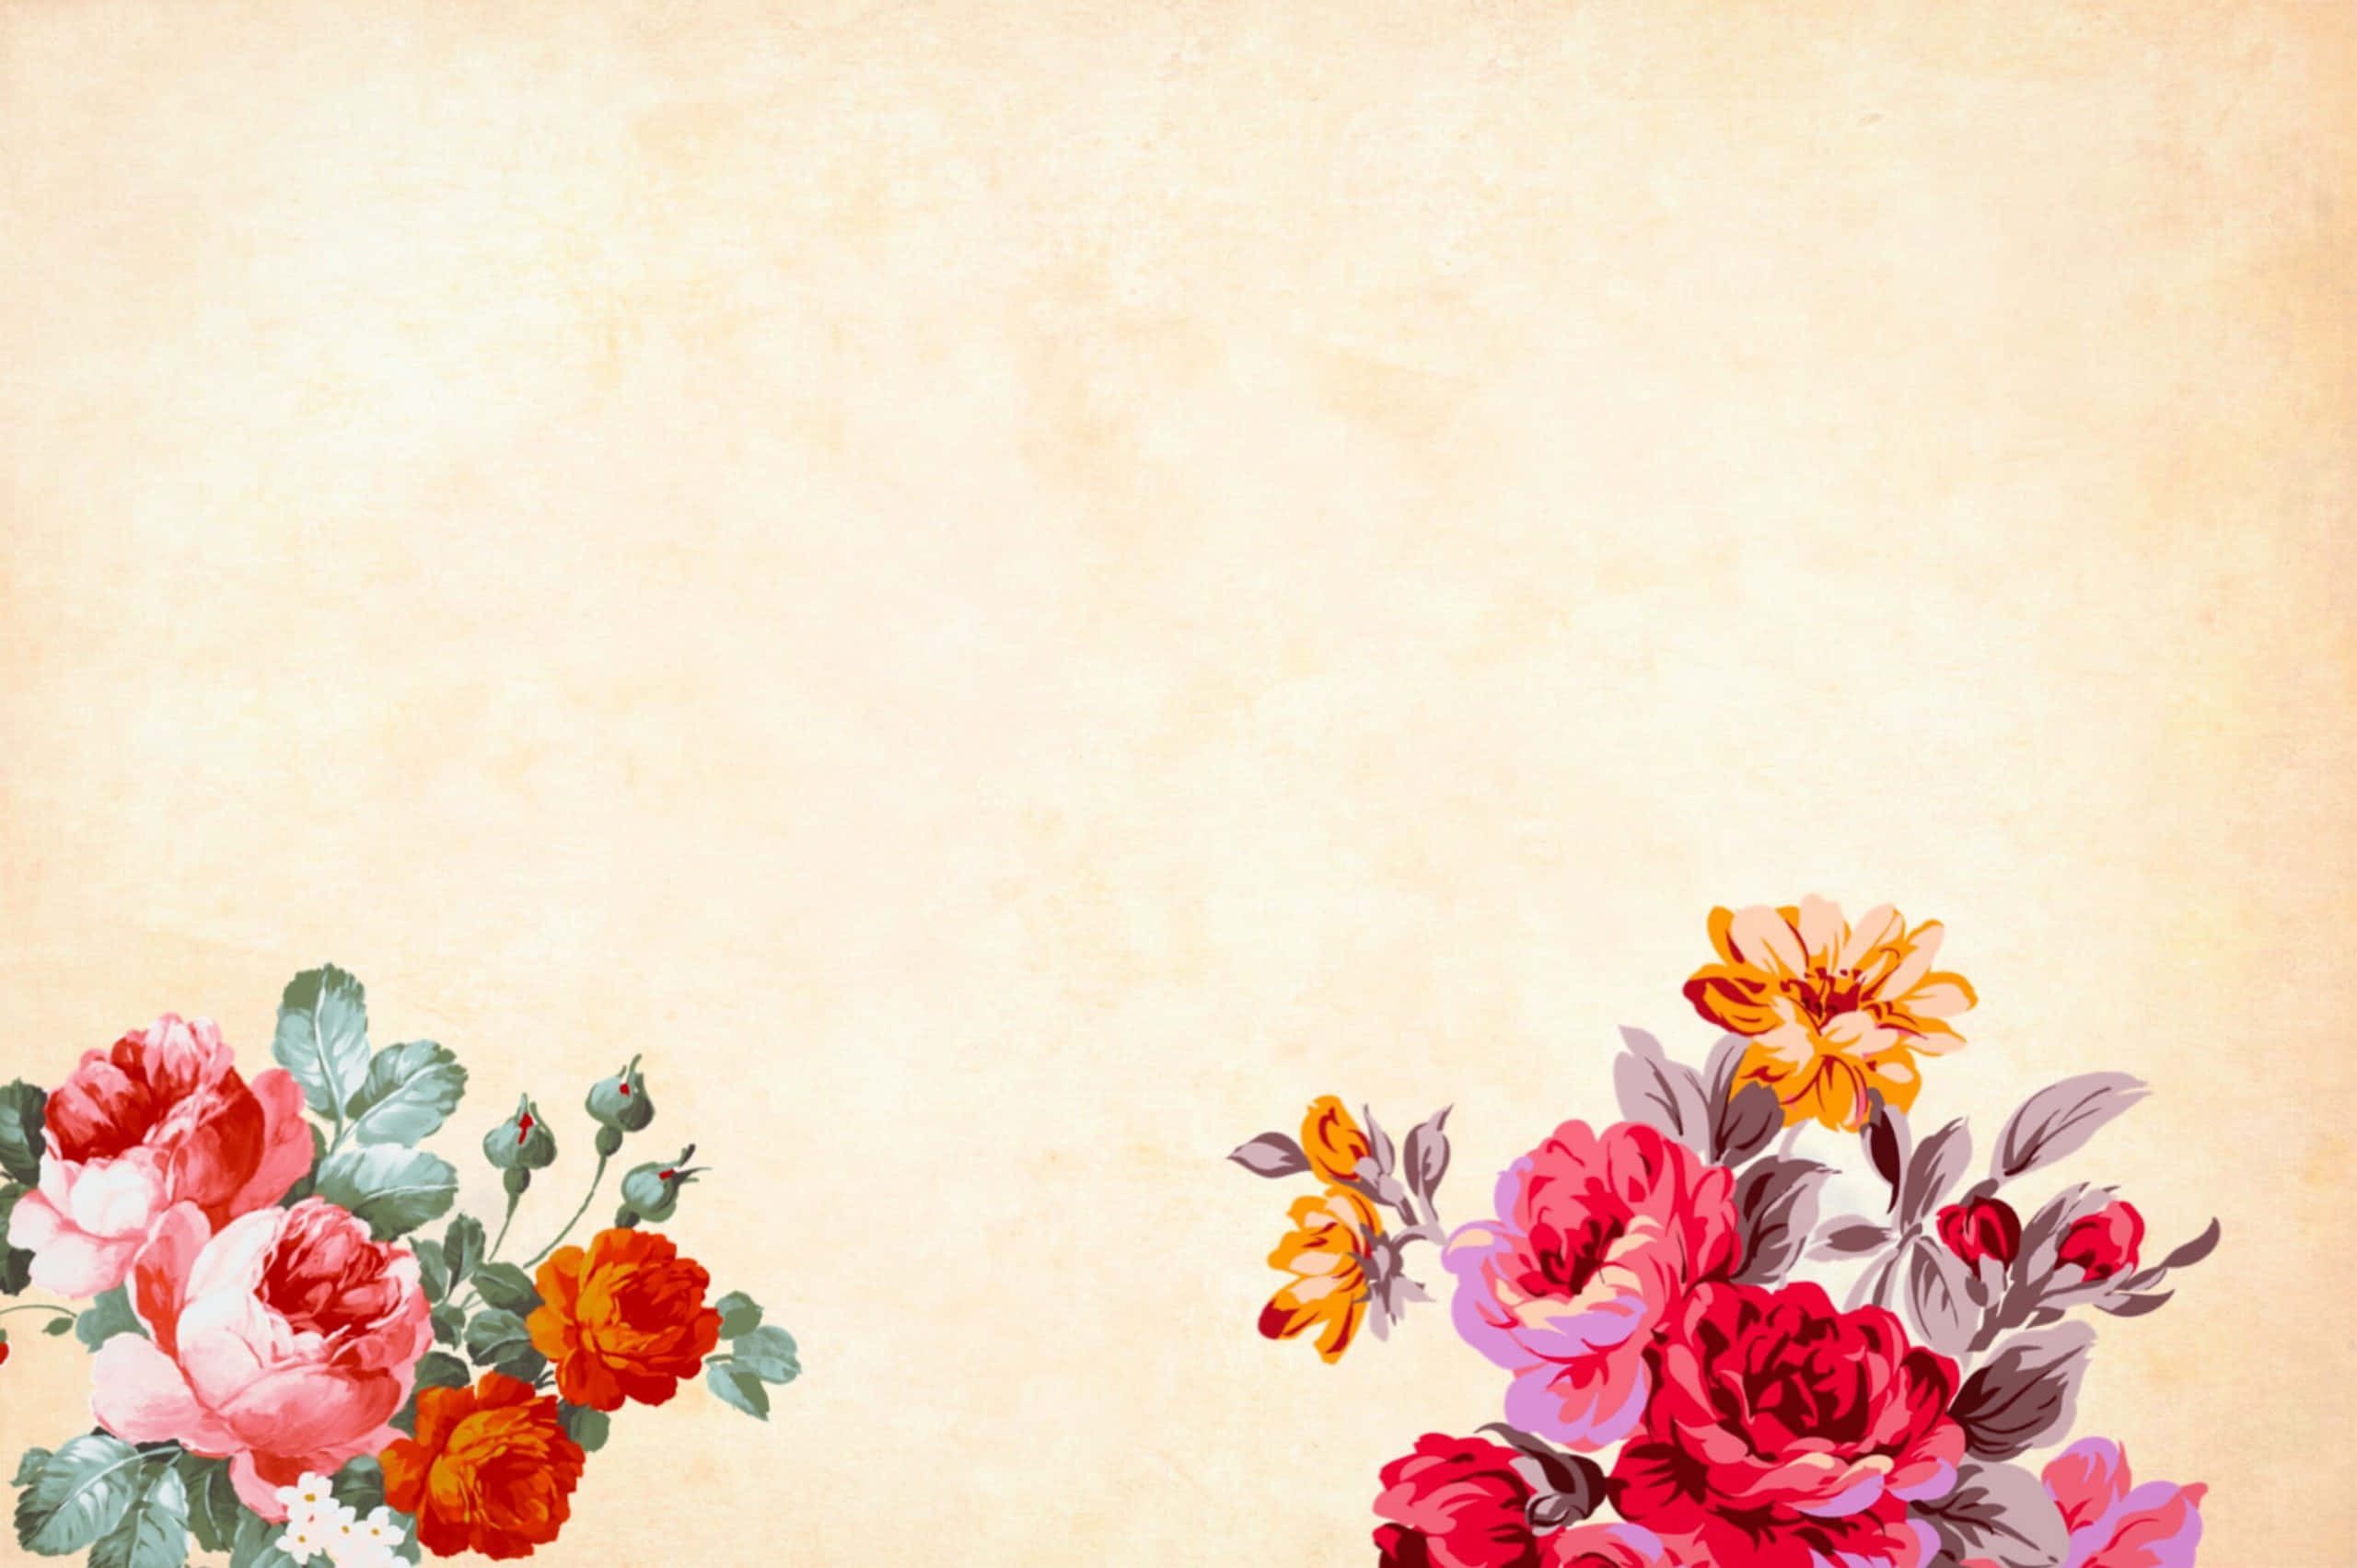 A Vintage Background With Flowers